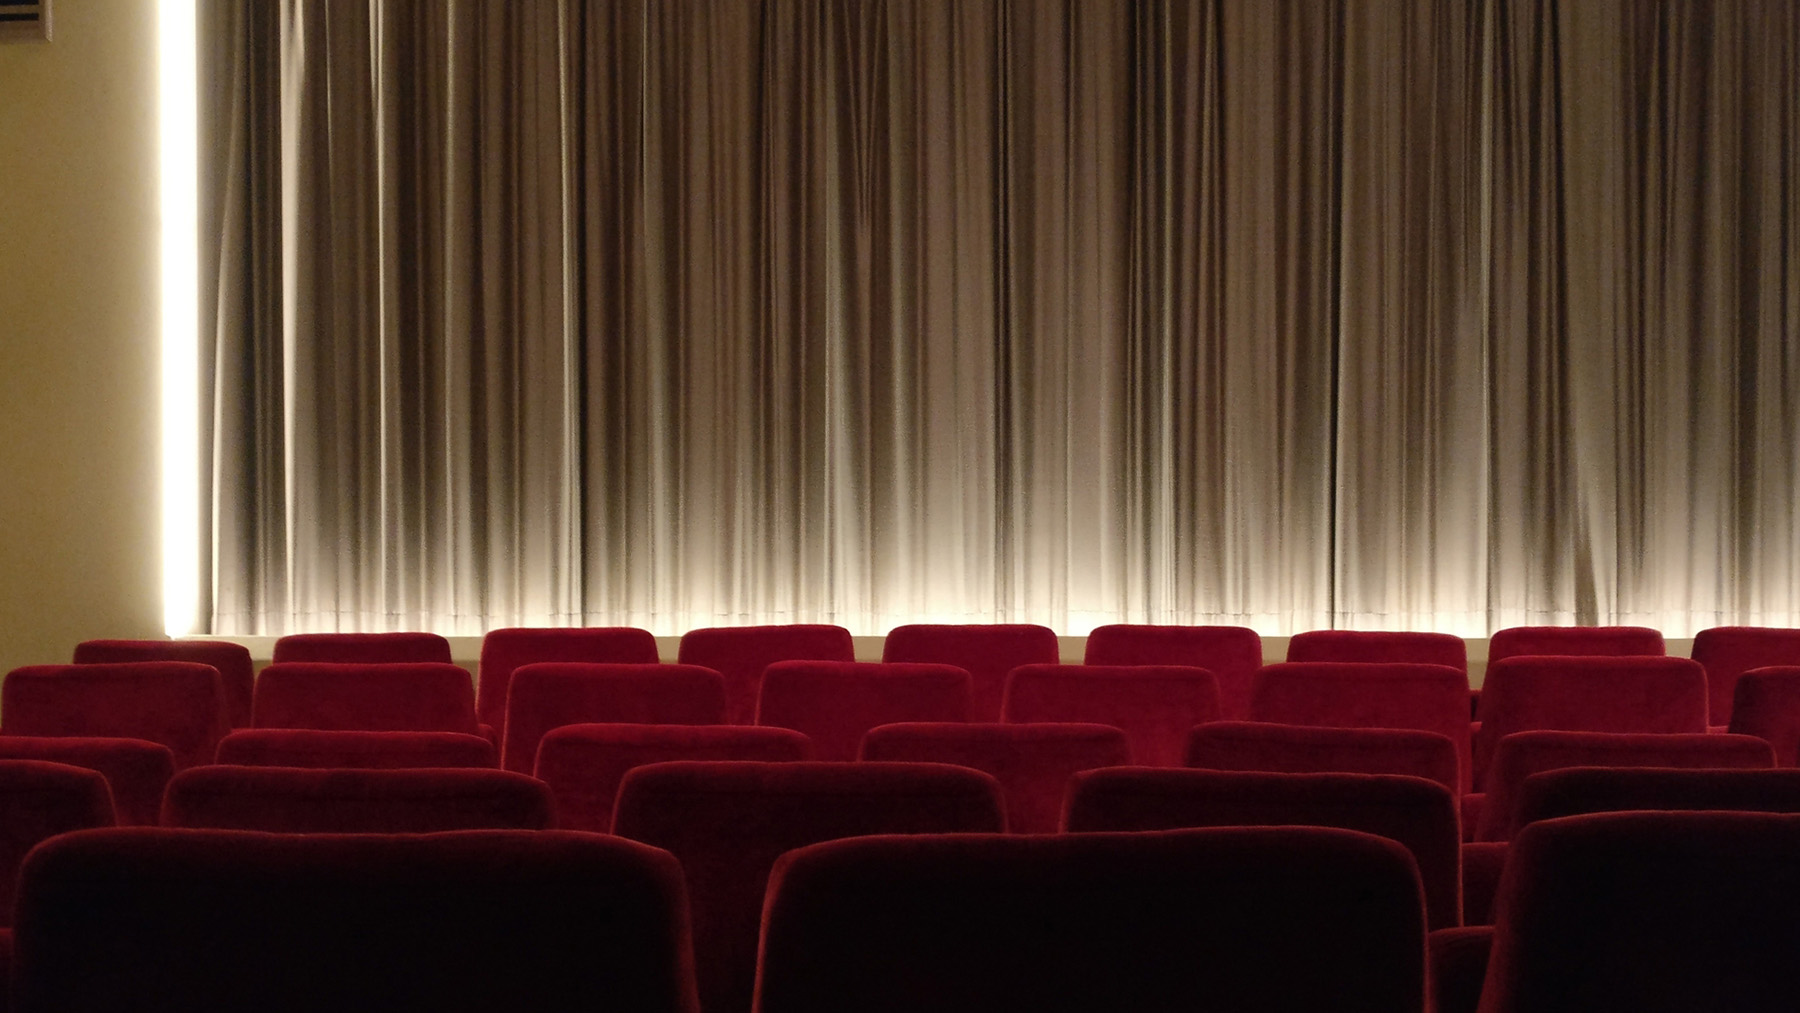 Stock image of a movie theater with lights on stage and empty red seats from RawPixel.com